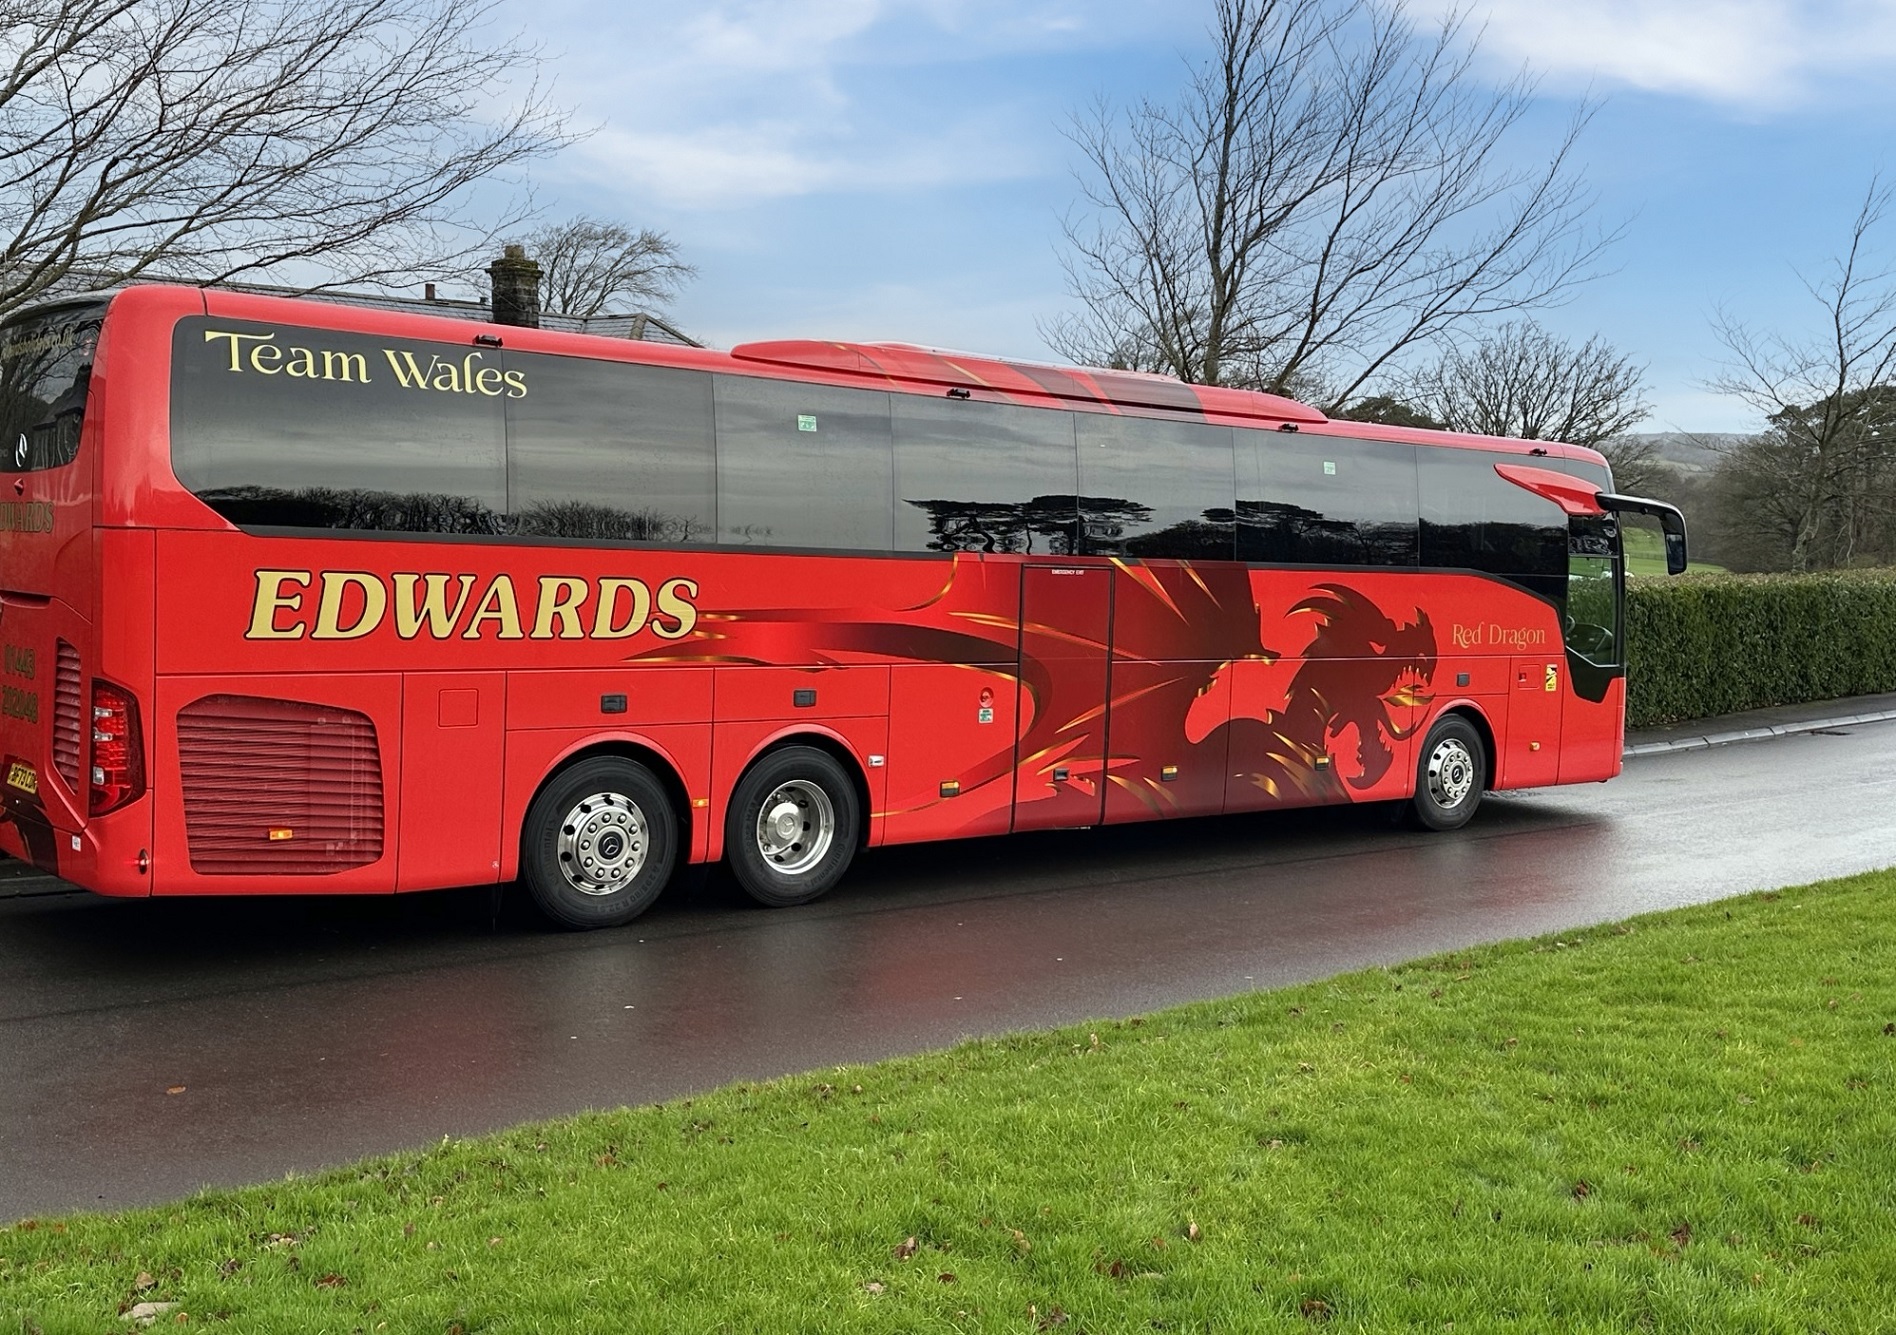 Edwards Coaches new Red Dragon vehicle